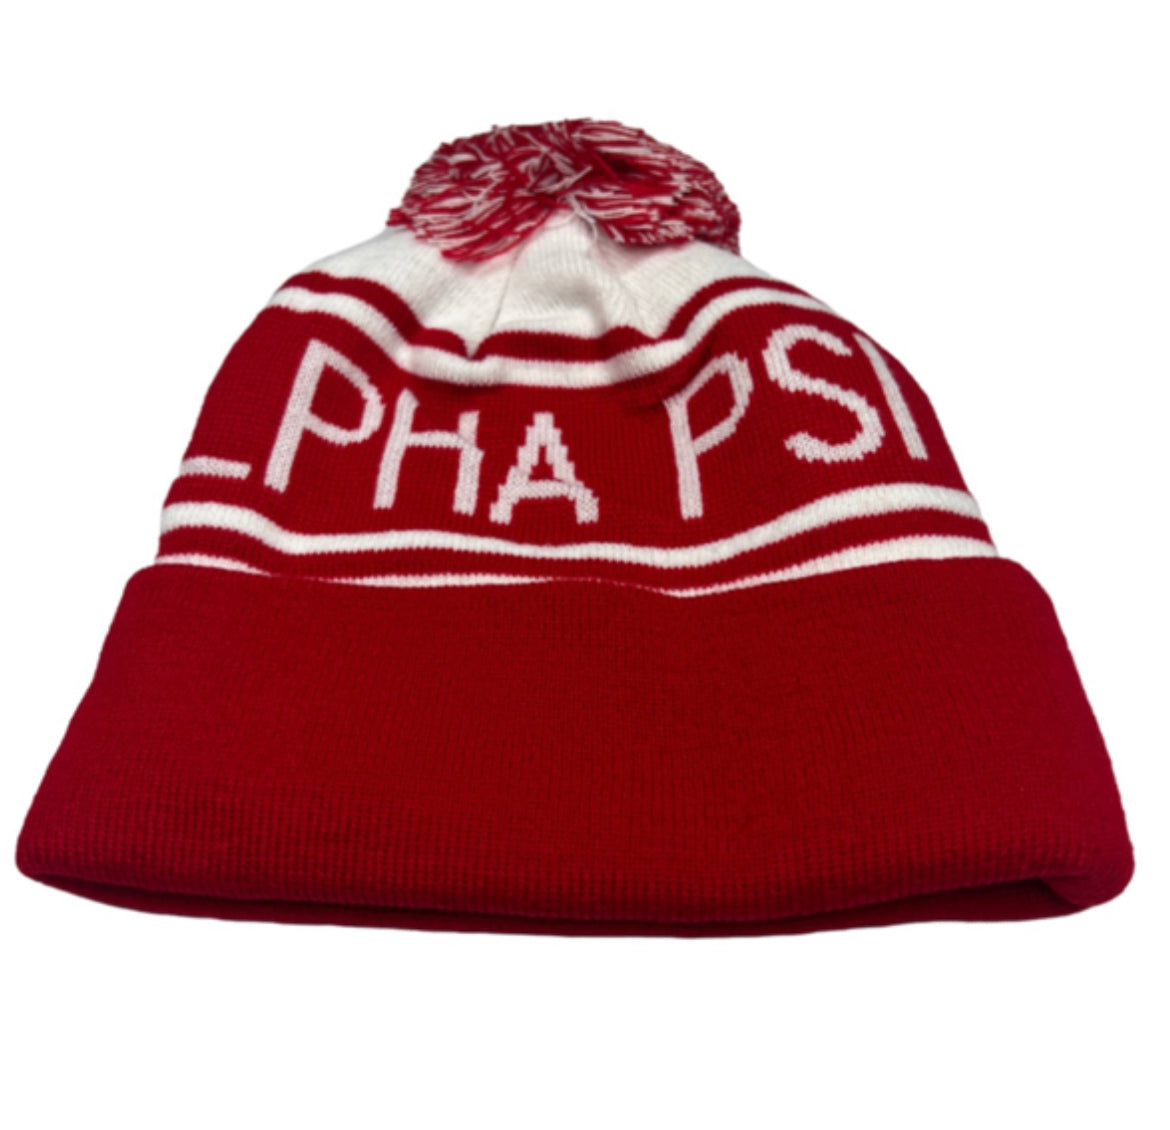 Show your love for Kappa Alpha Psi with this stylish Shield Beanie. Made for members of the esteemed fraternity and organization, this beanie is perfect for keeping your head warm during the colder months. The classic shield design proudly displays your affiliation, while the comfortable material allows for all-day wear. Whether you're lounging on campus or hitting the town, this beanie is a must-have accessory for any Kappa Alpha Psi member or supporter.
